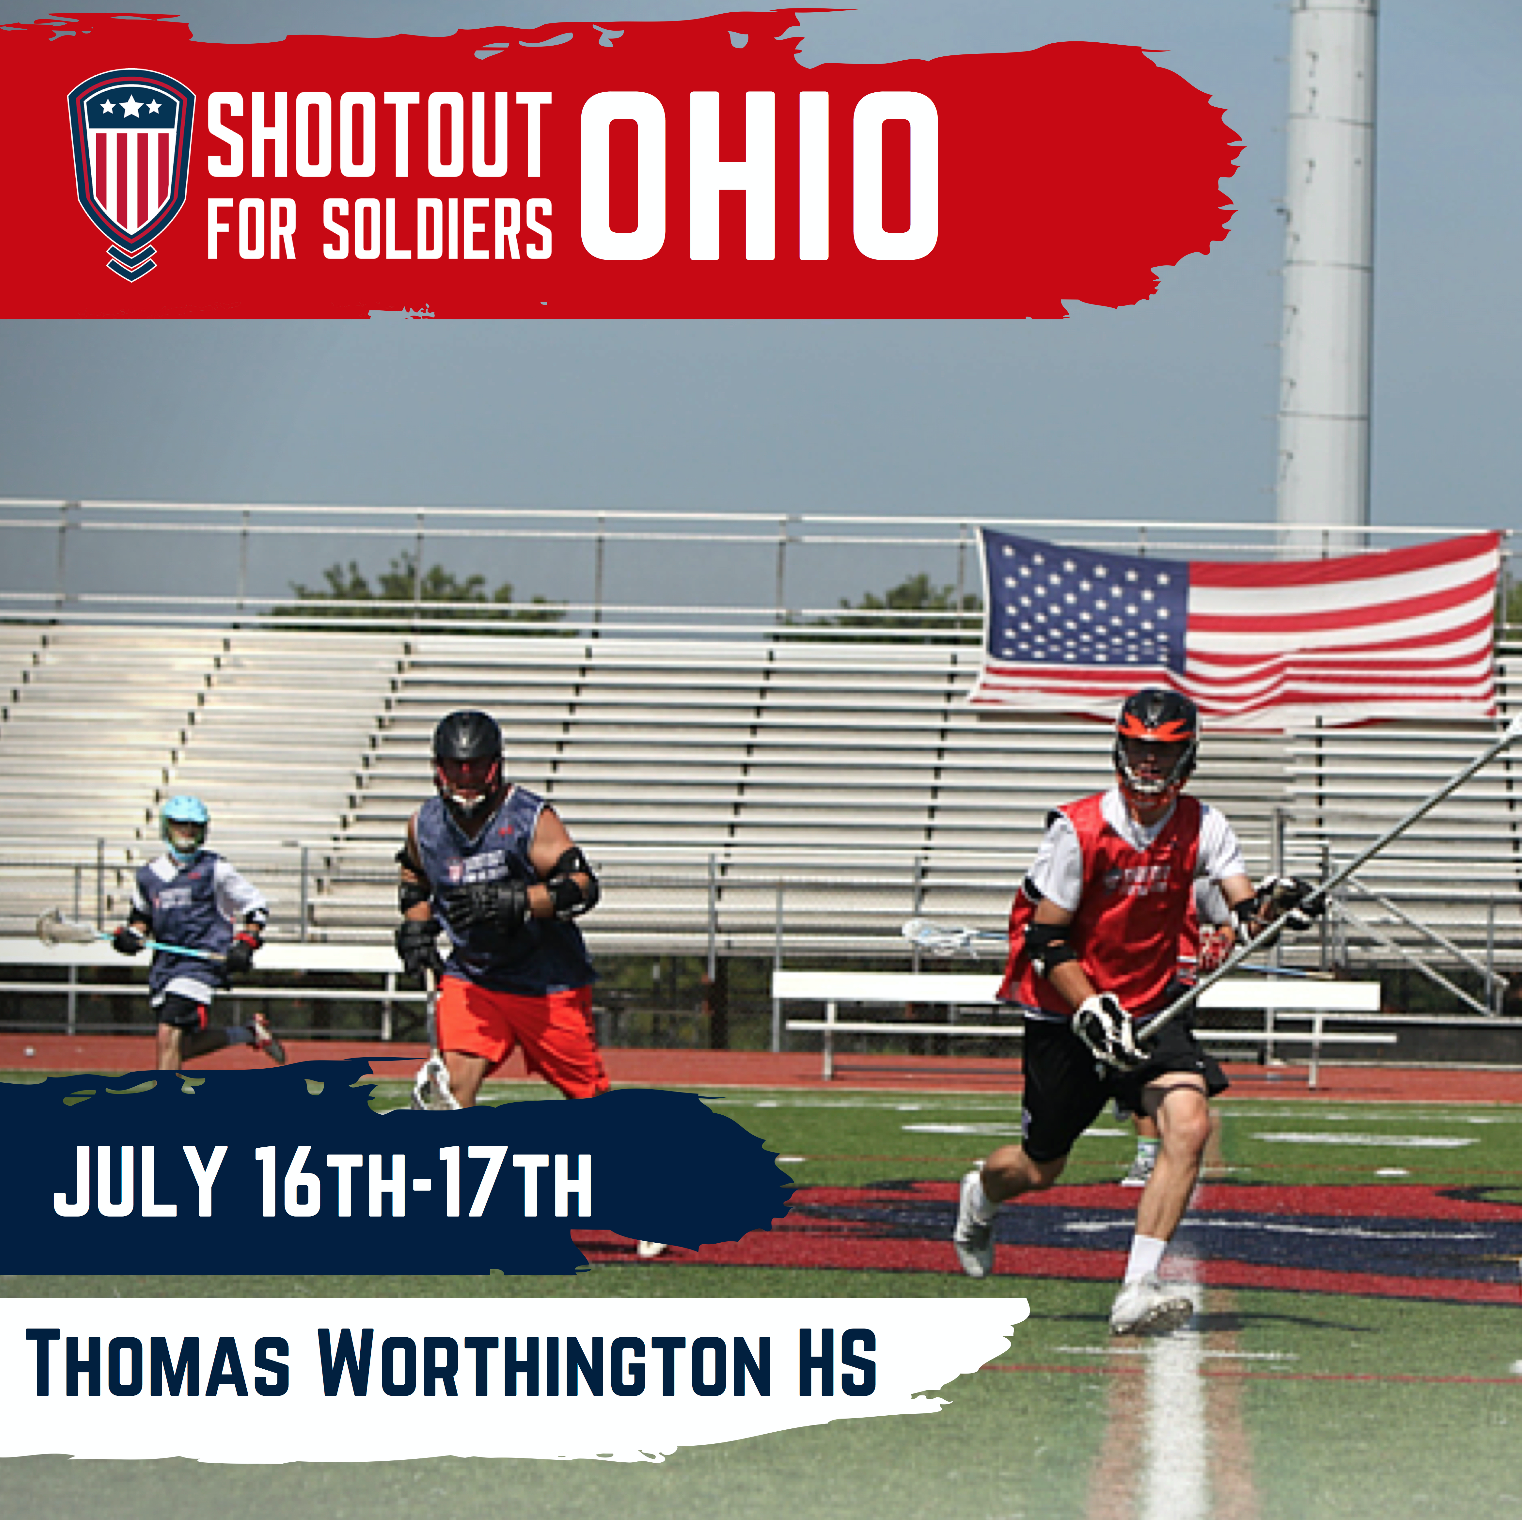 Shootout for Soldiers Ohio: Official Press Release